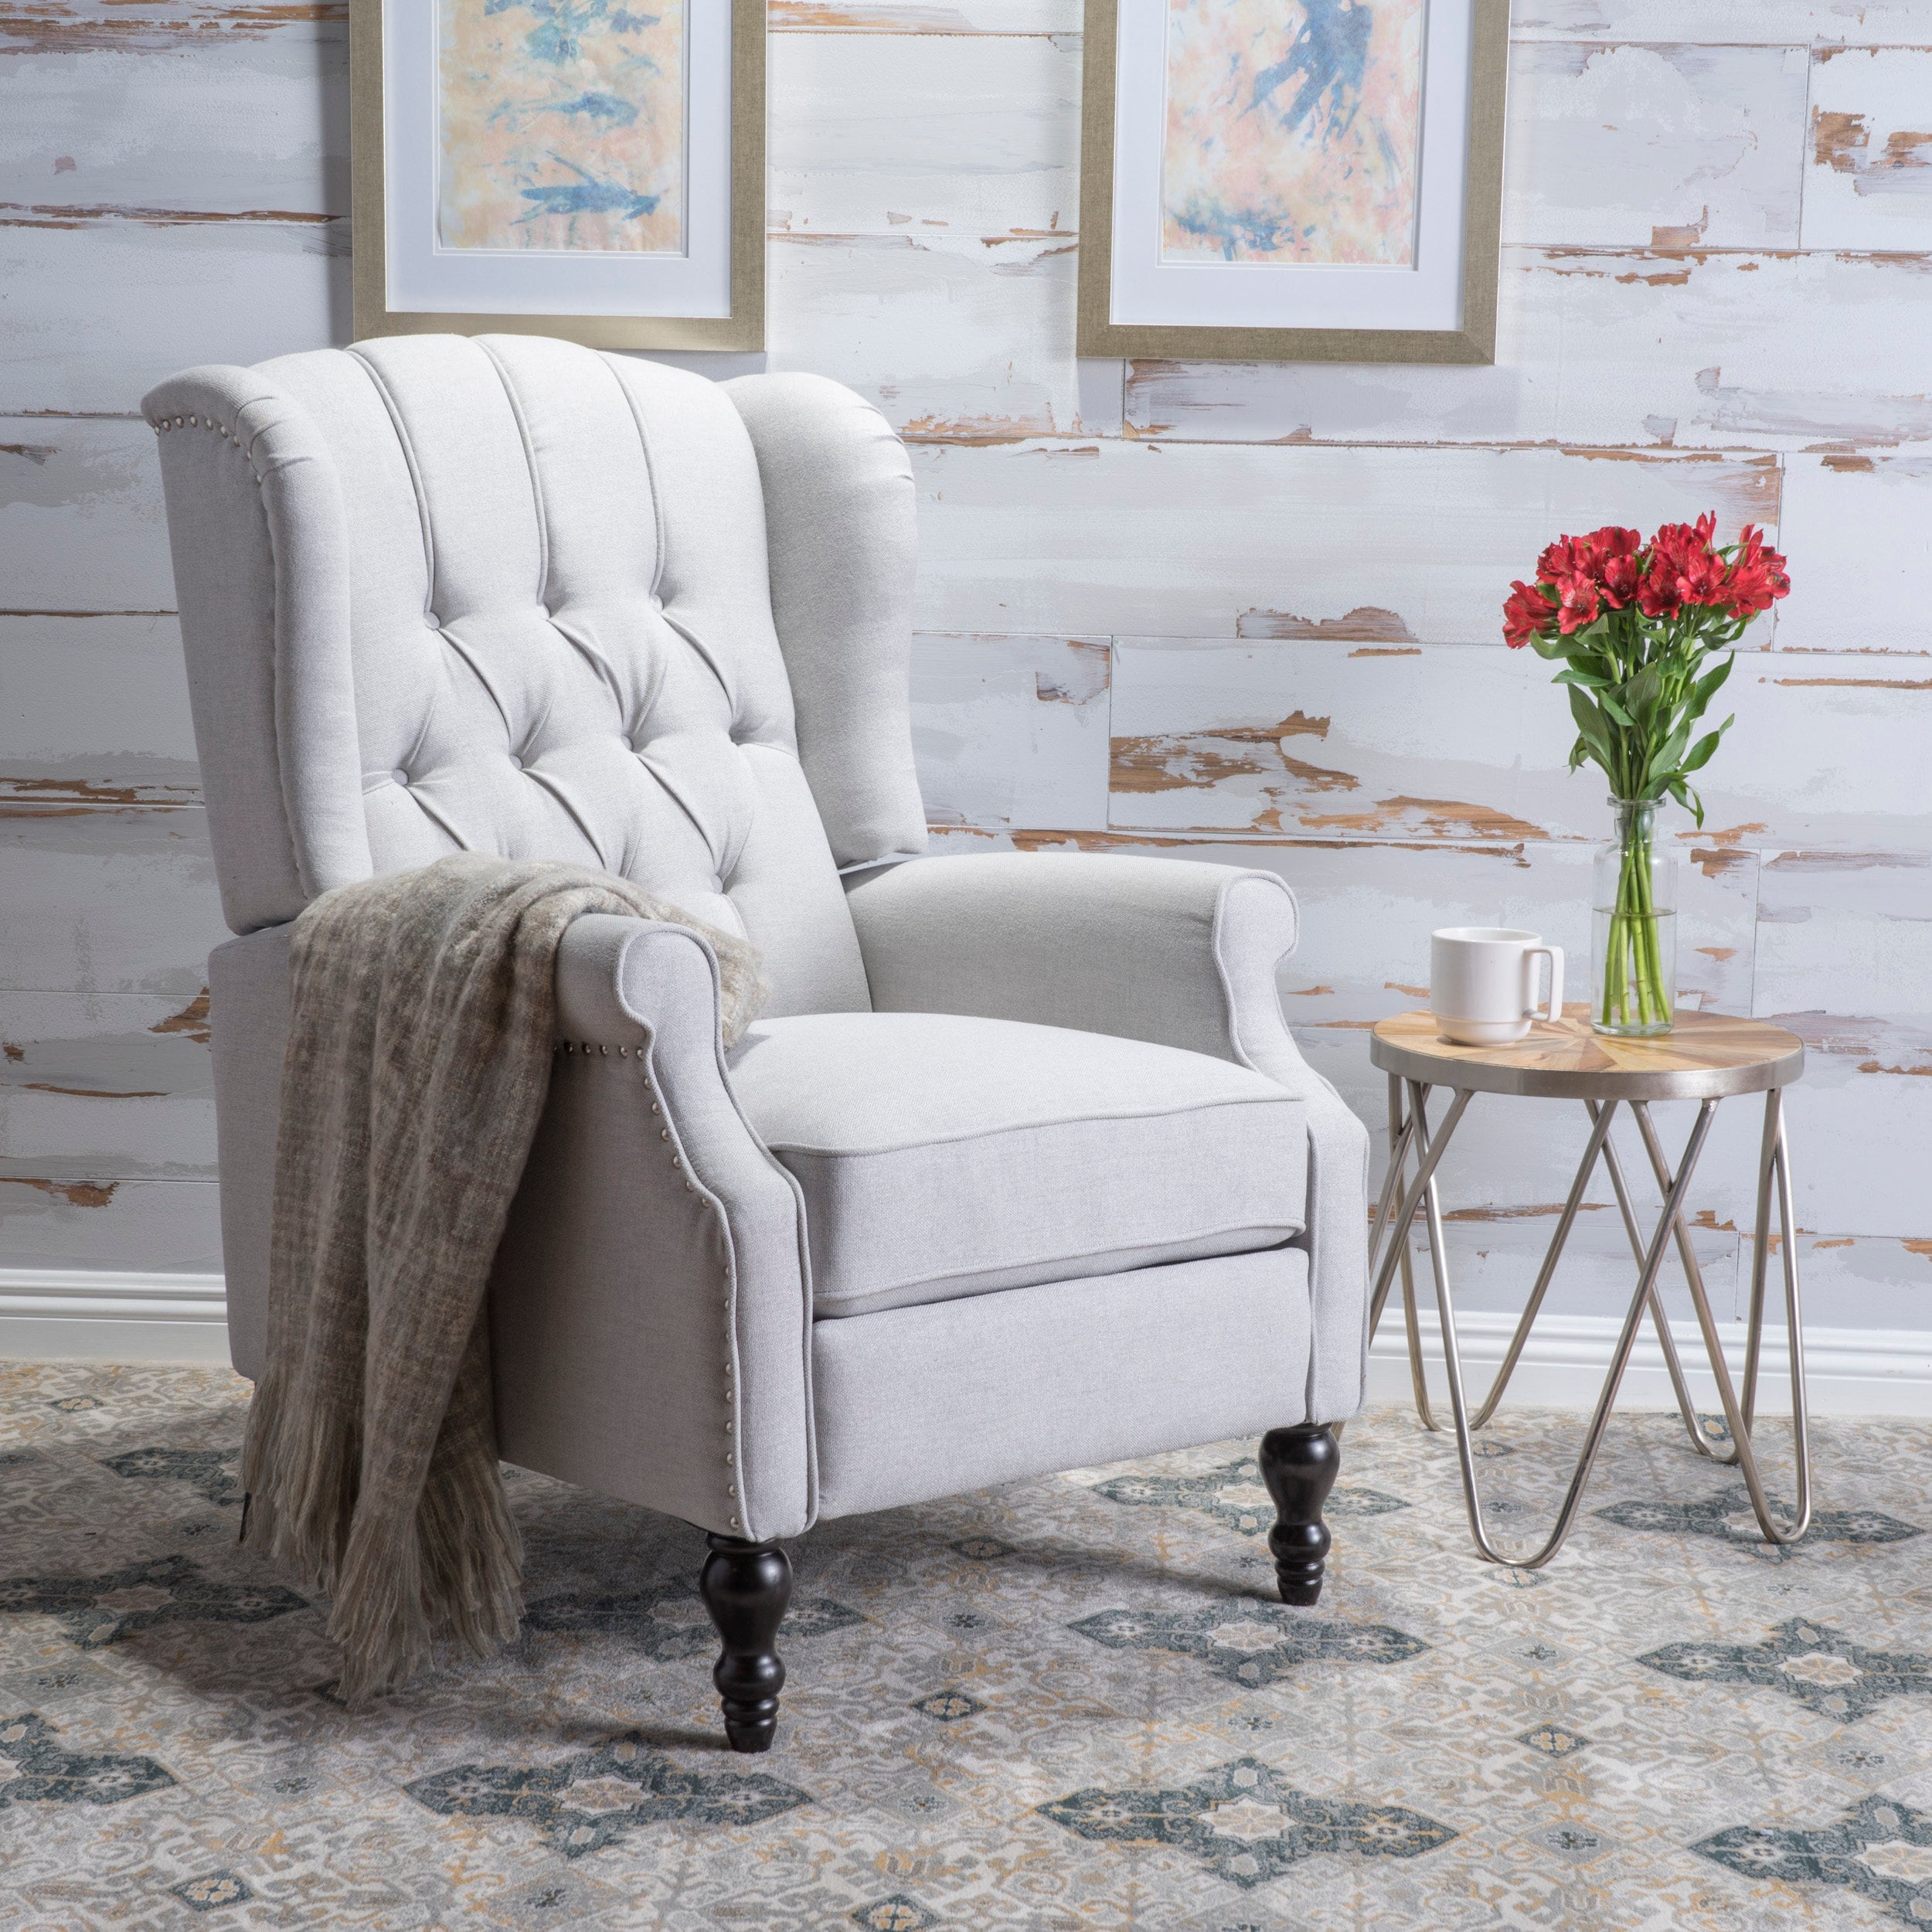 https://ak1.ostkcdn.com/images/products/is/images/direct/b53f8273e3200a98e1713dba59fa5d8d43c61cc0/Walter-Tufted-Fabric-Recliner-Club-Chair-by-Christopher-Knight-Home.jpg